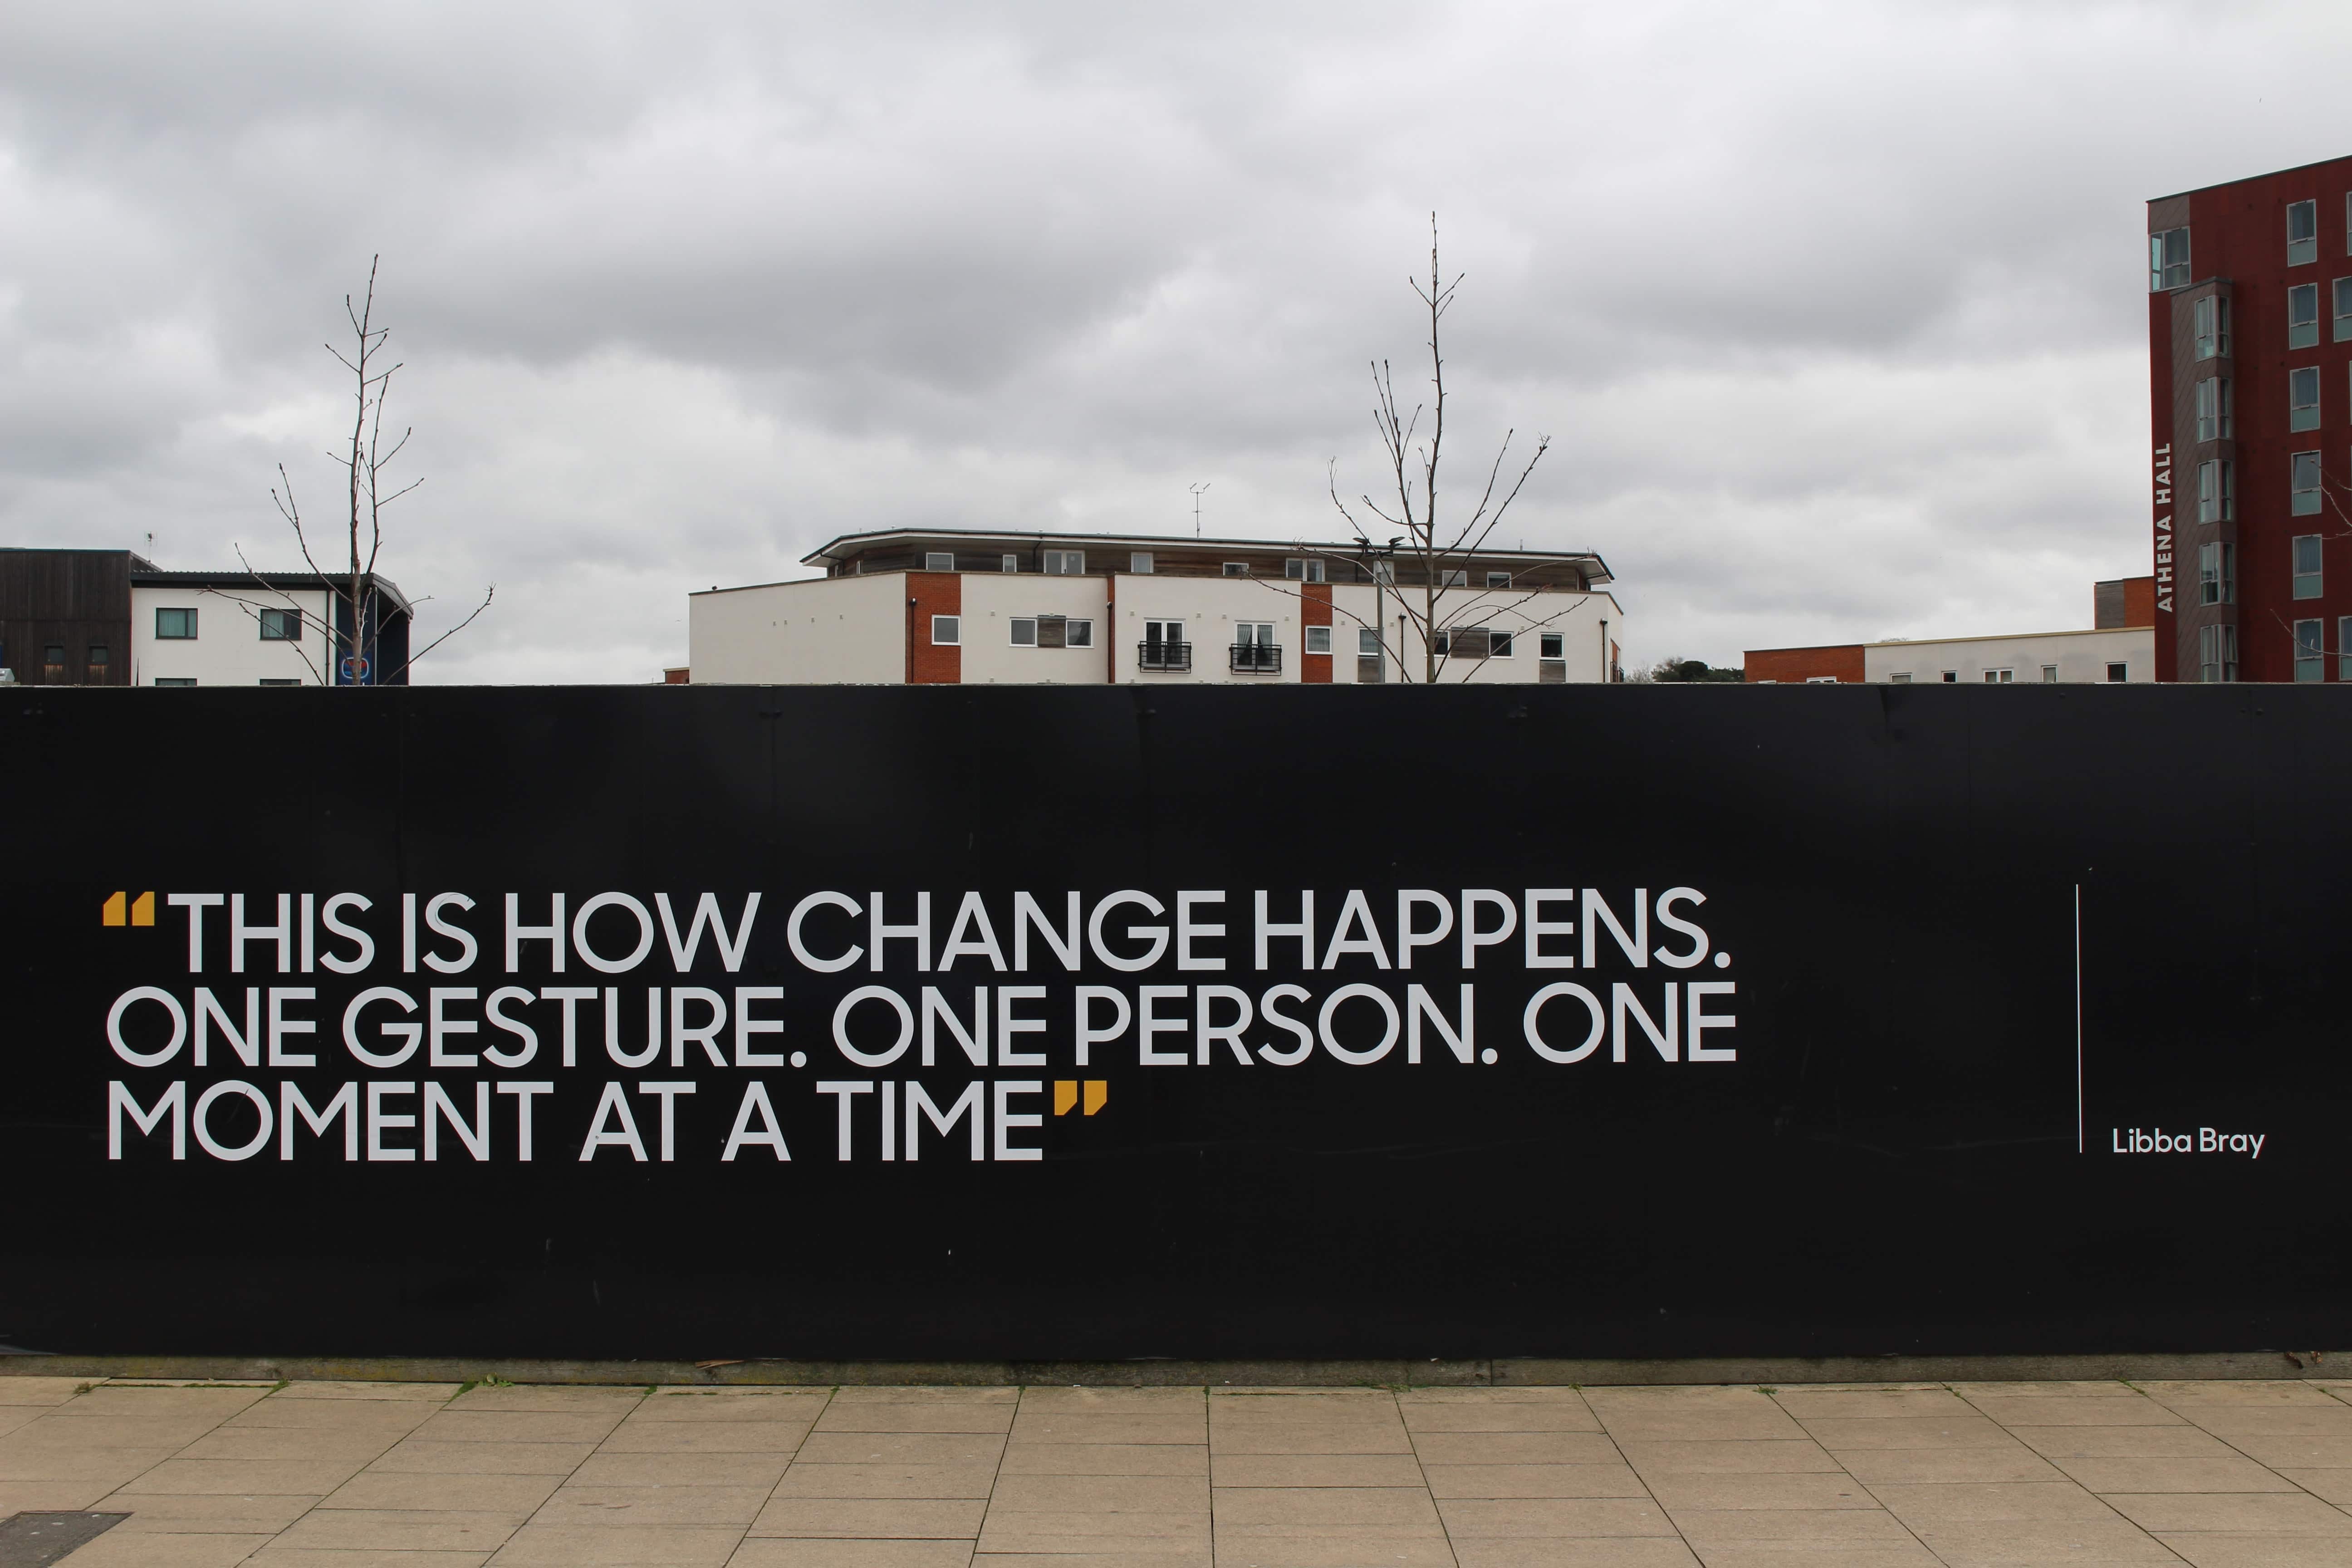 Quote: "This is how change happens. One gesture. One person. One moment at a time."